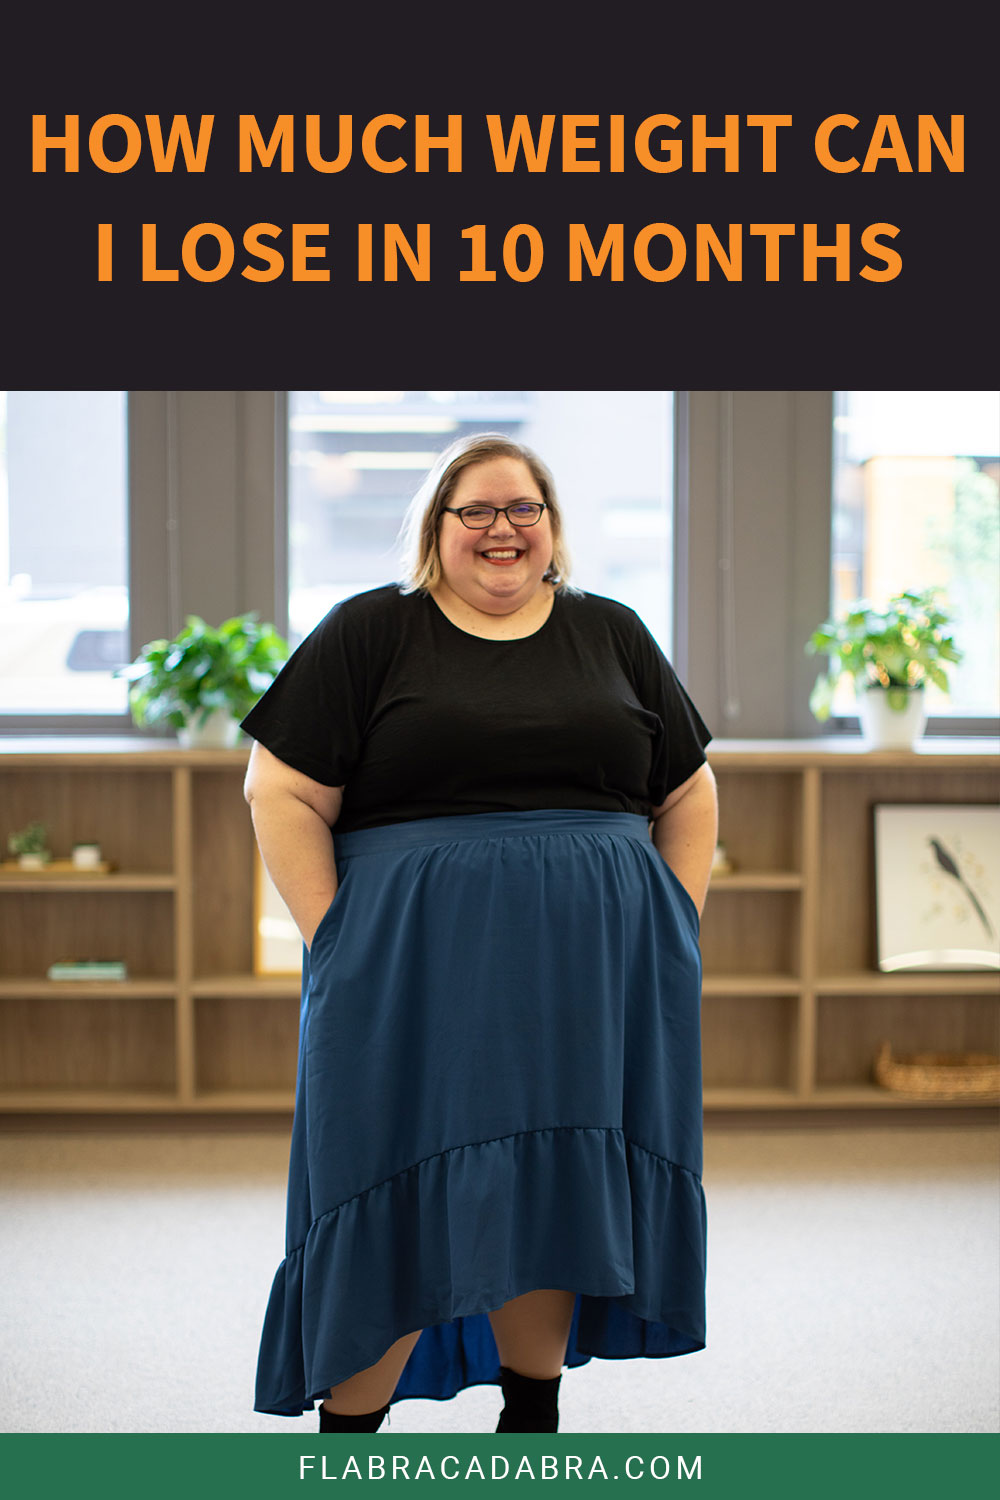 How much weight can I lose in 10 Months?